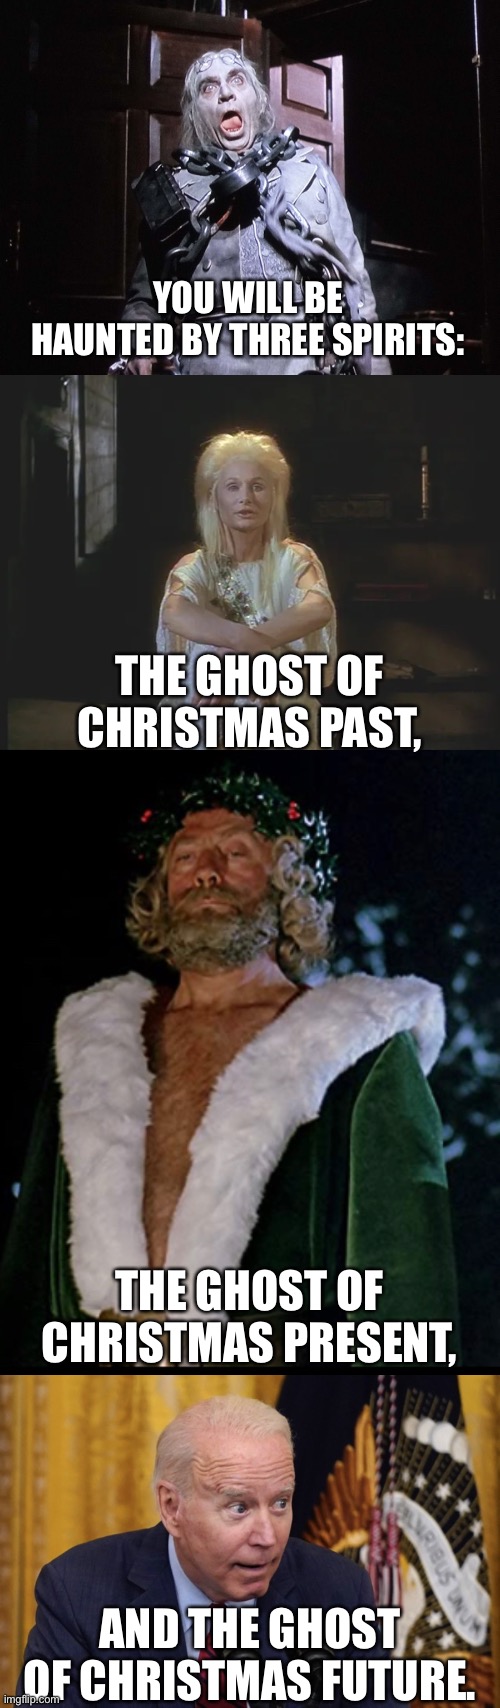 A Christmas Carol: COVID Edition | YOU WILL BE HAUNTED BY THREE SPIRITS:; THE GHOST OF CHRISTMAS PAST, THE GHOST OF CHRISTMAS PRESENT, AND THE GHOST OF CHRISTMAS FUTURE. | image tagged in biden,covid fear | made w/ Imgflip meme maker